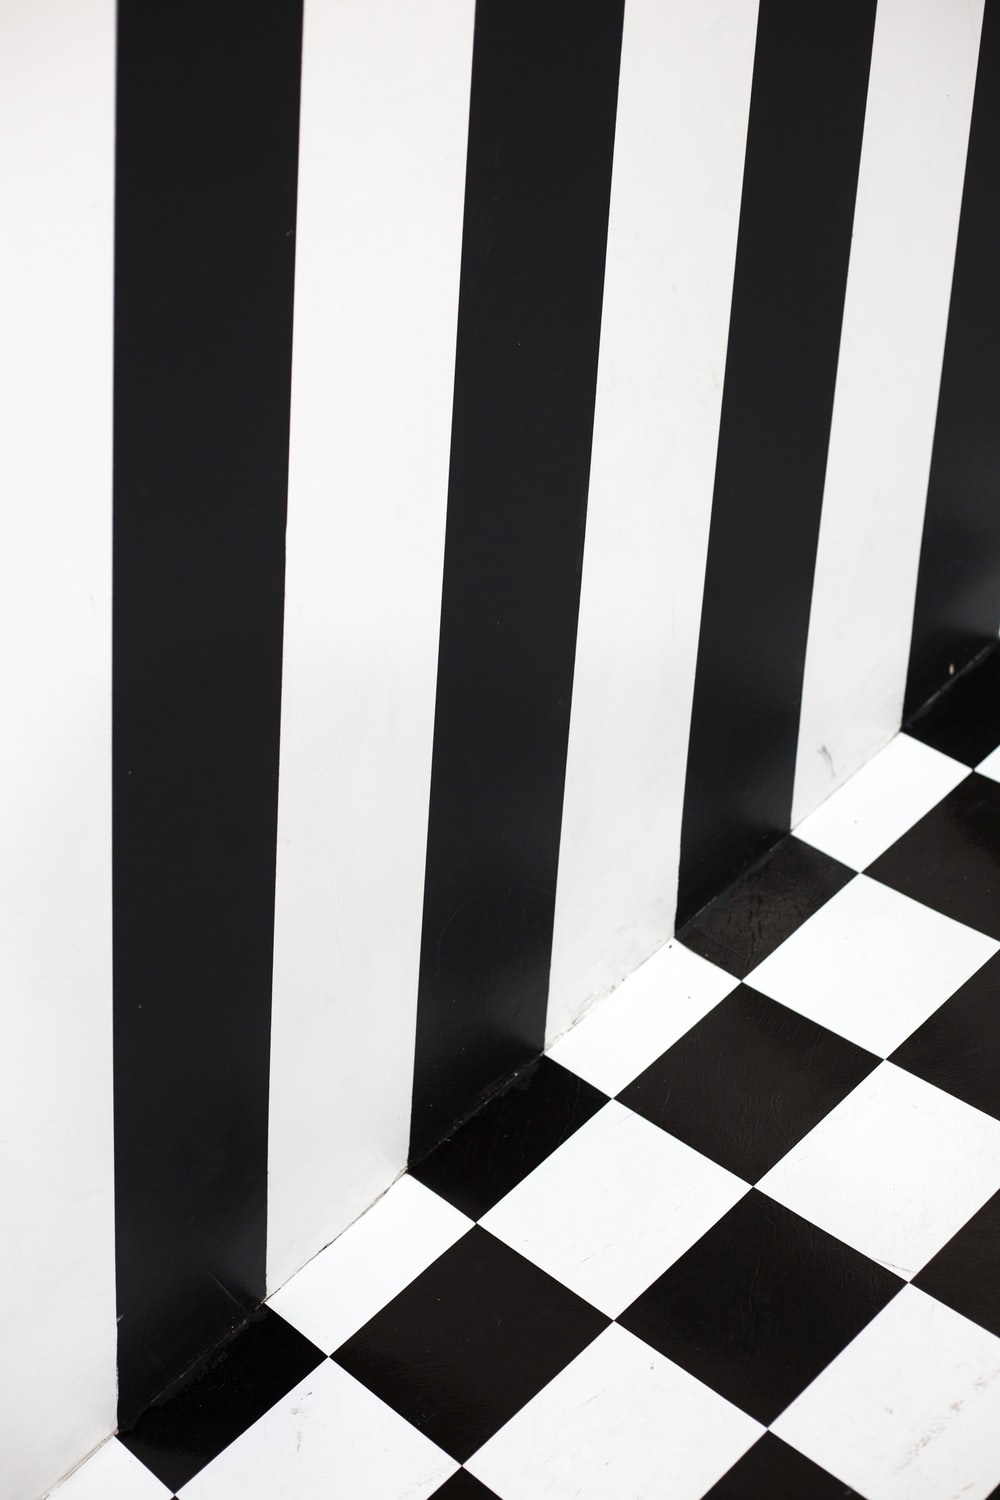 Black And White Stripes Picture. Download Free Image